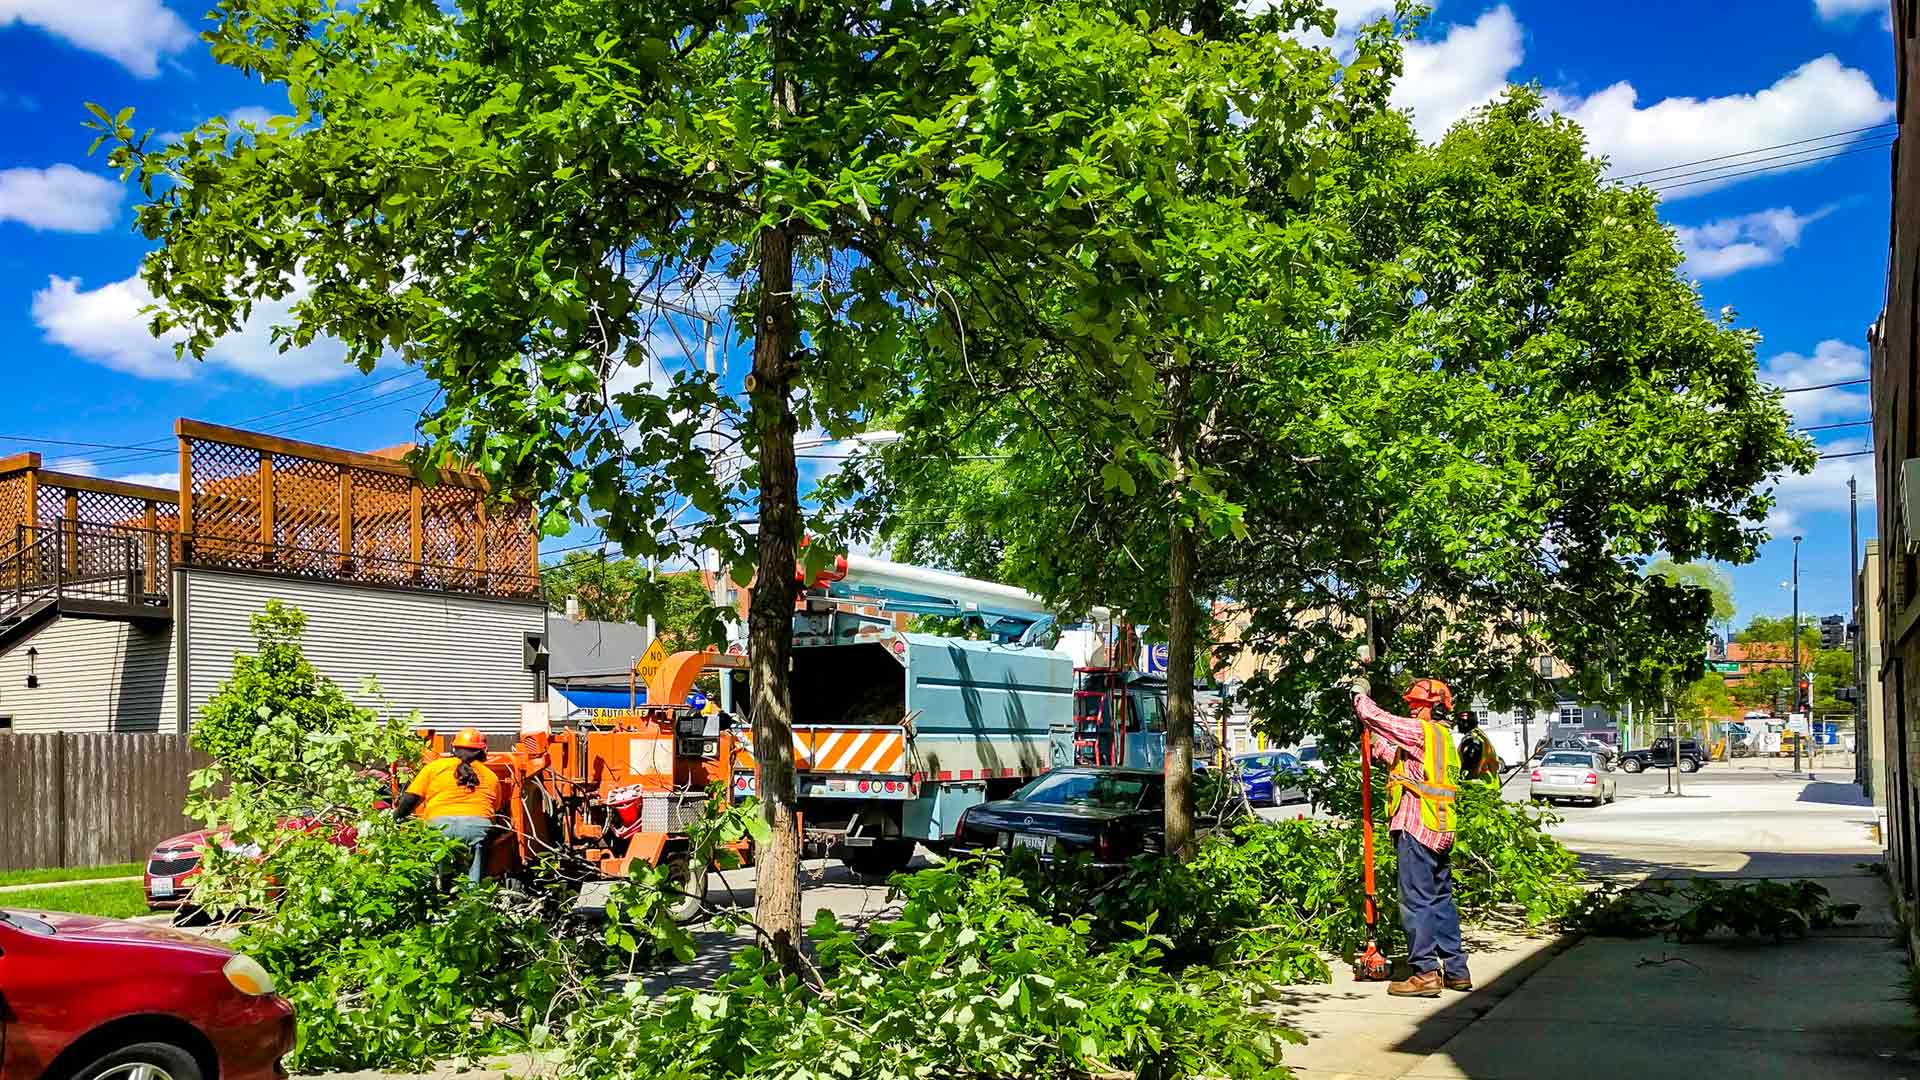 Professional trimming trees by street in The Bronx, NY.